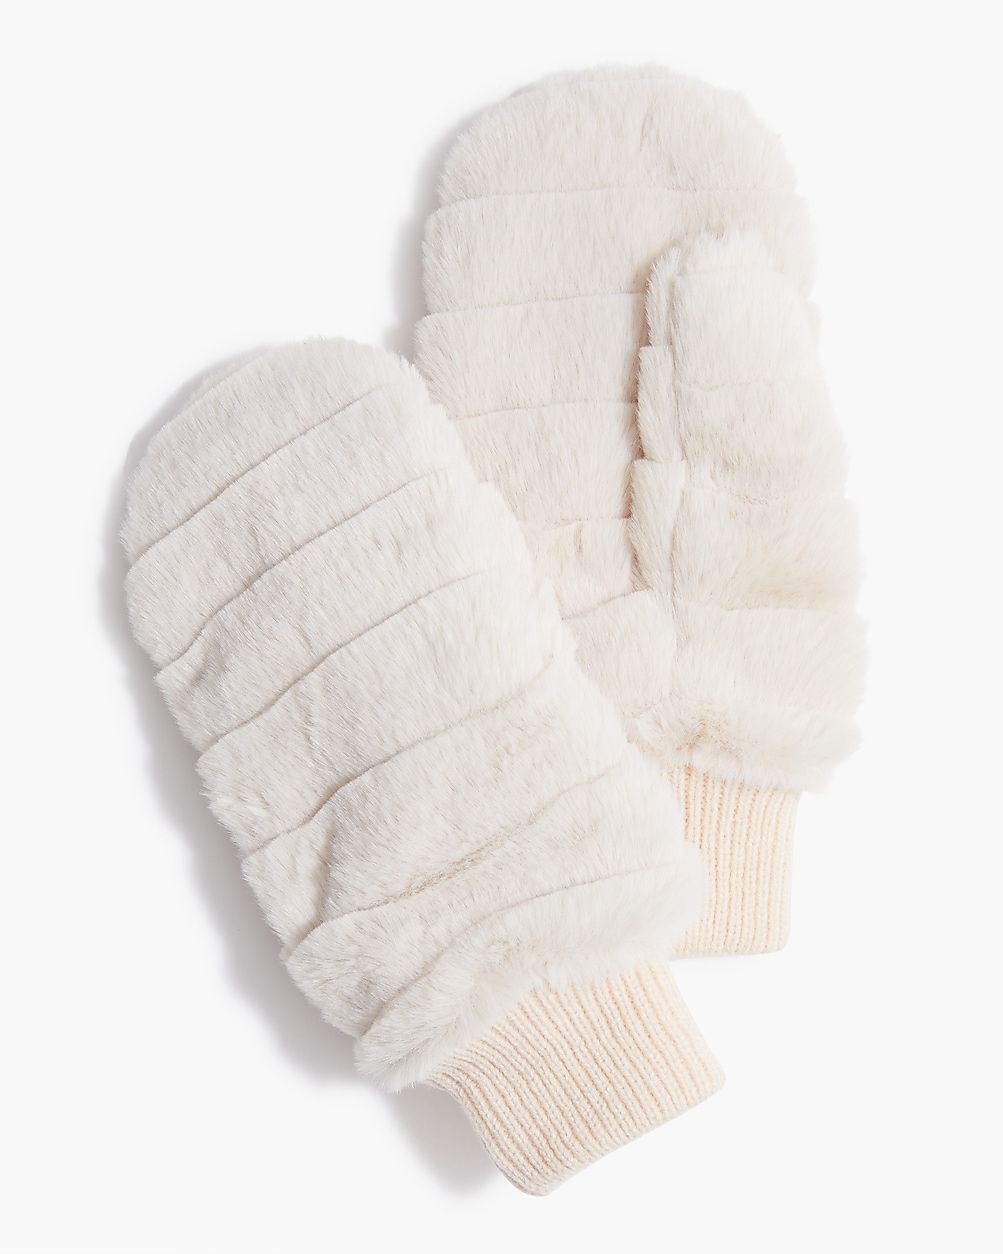 Faux fur-lined mittens | J.Crew Factory